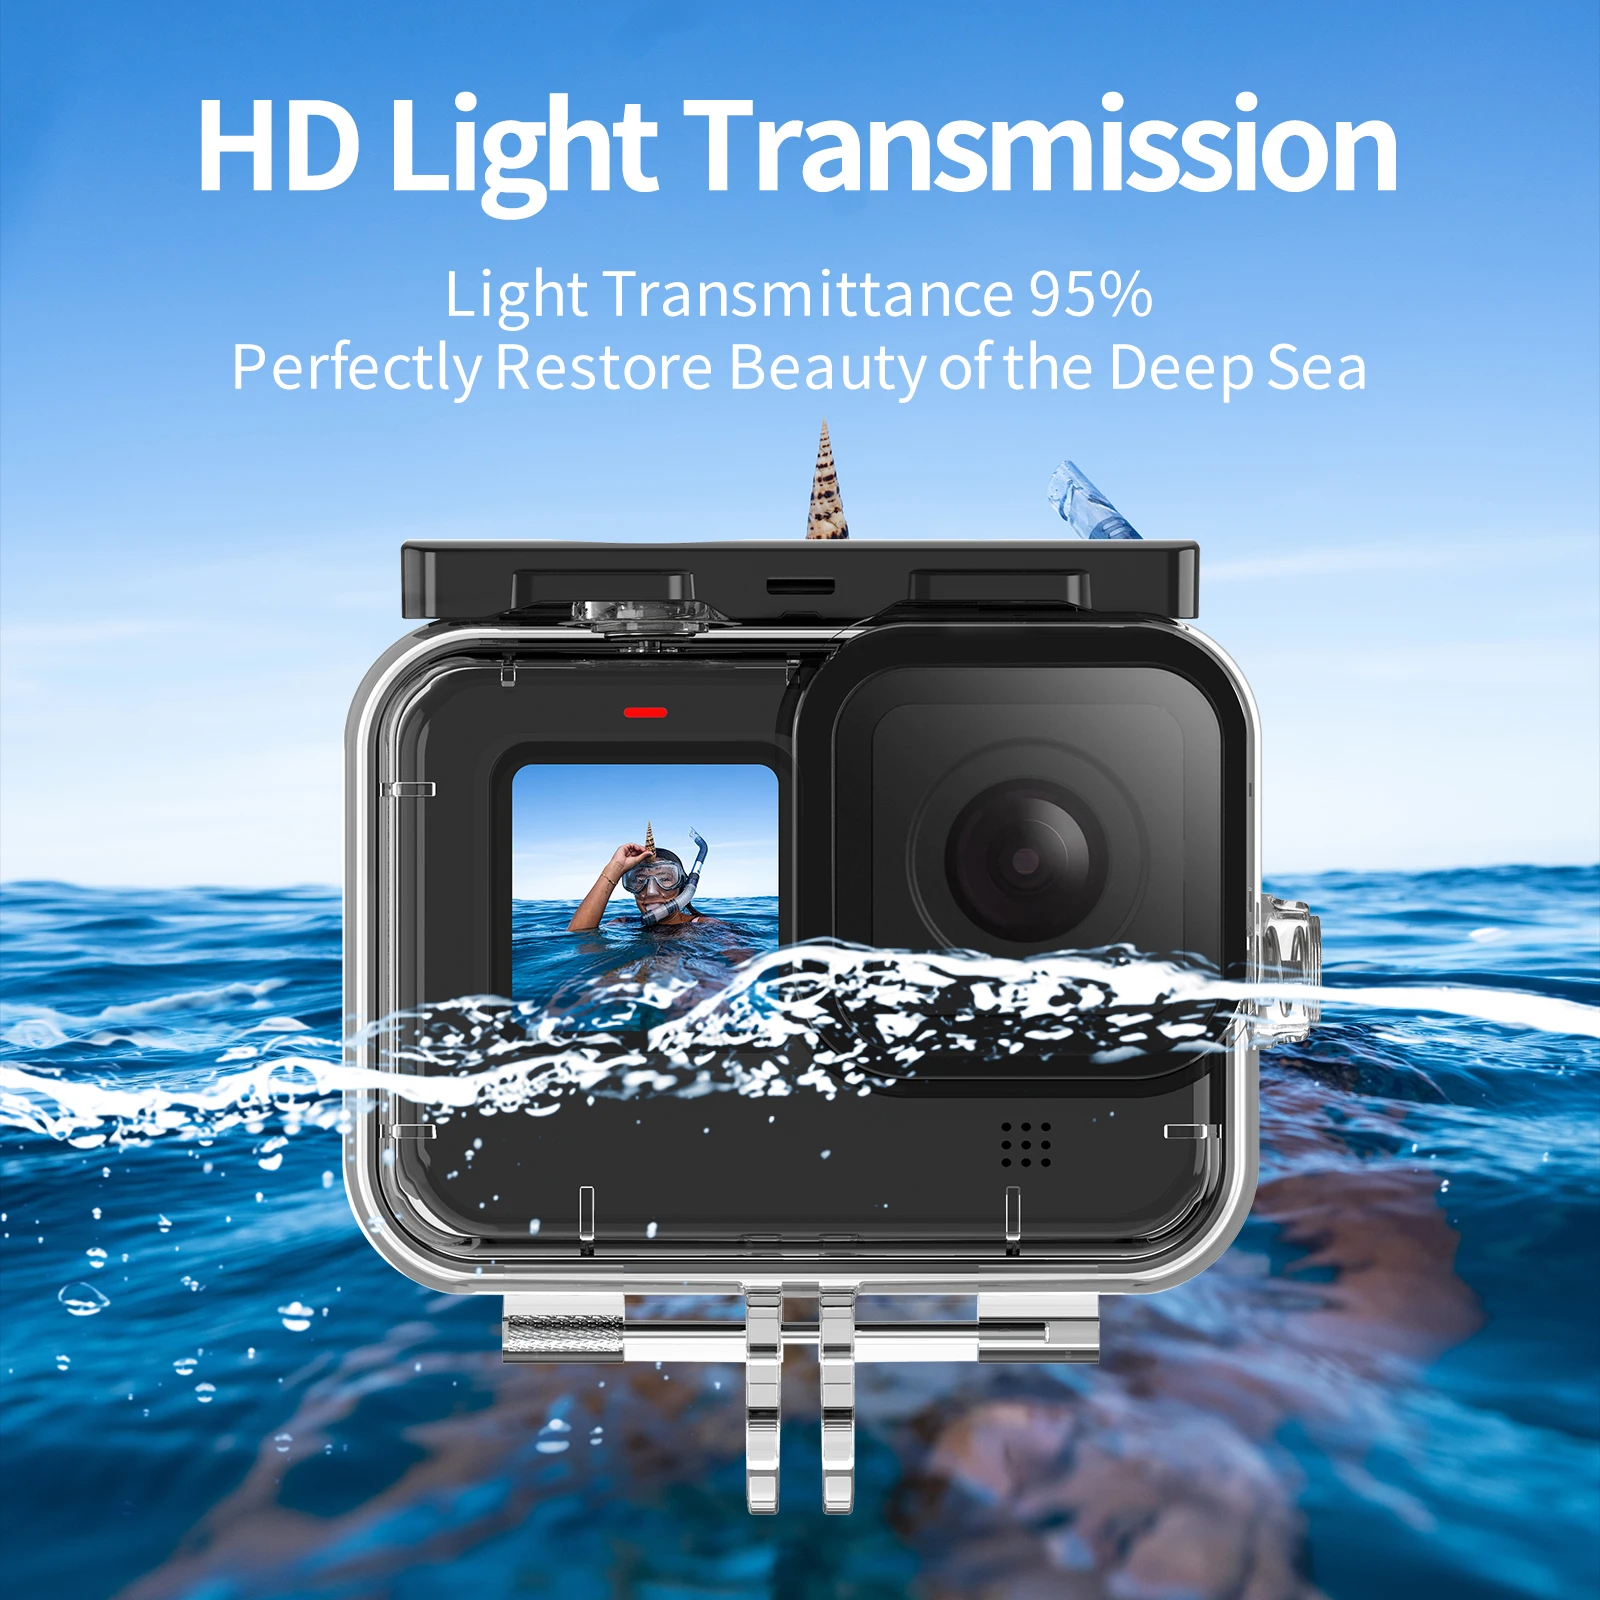 60 m Underwater YALLSAME Waterproof Housing Case for GoPro Hero 10 9 Black Action Camera Scuba Snorkel Support Deepest 196 ft Underwater Photography Recording Suitable for Diving 